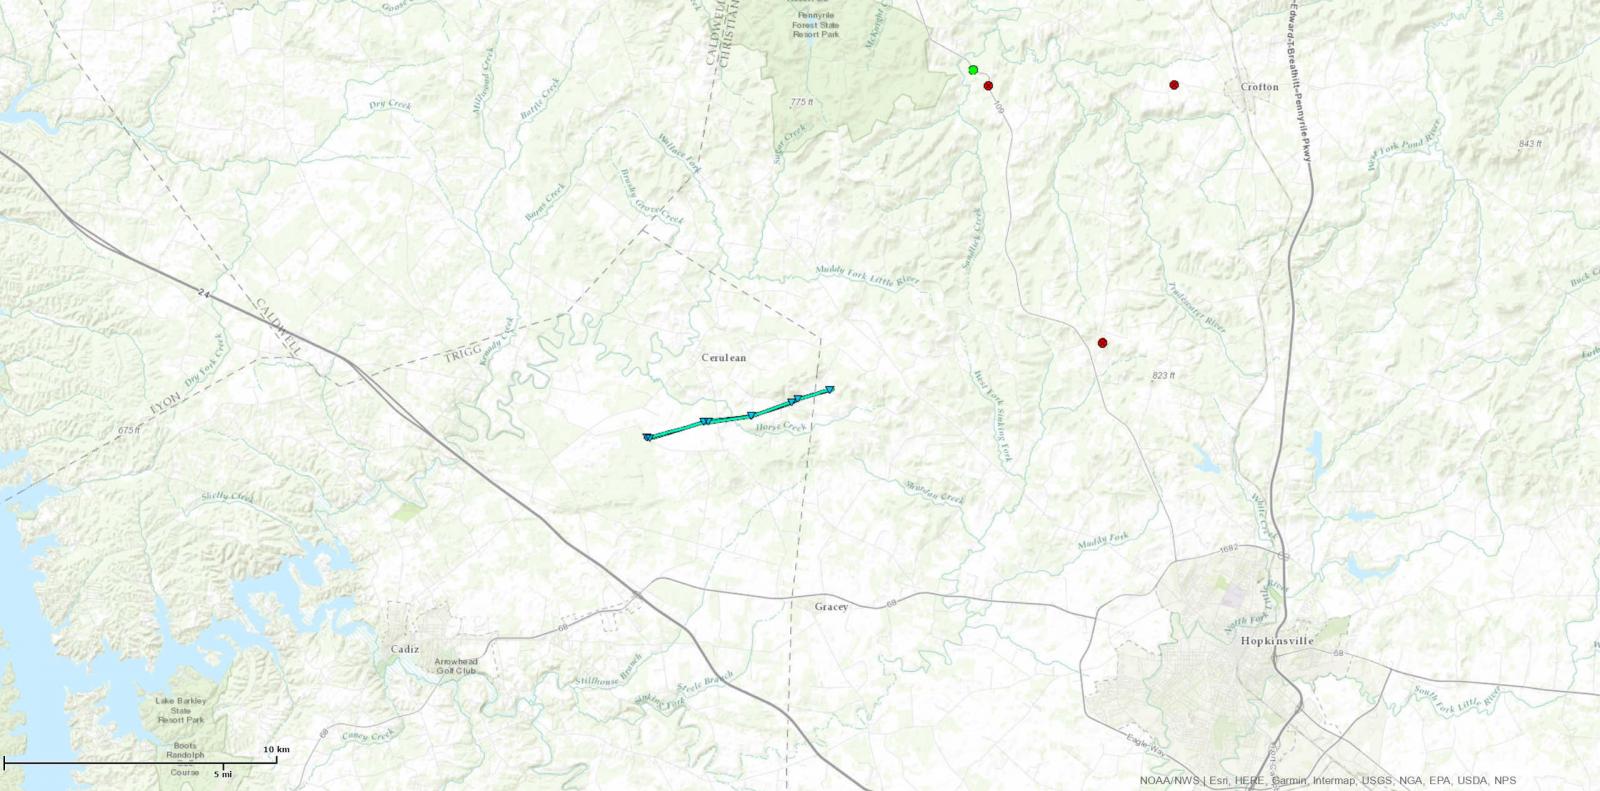 Track Map of EF0 tornado in Trigg and Christian counties on March 27, 2017